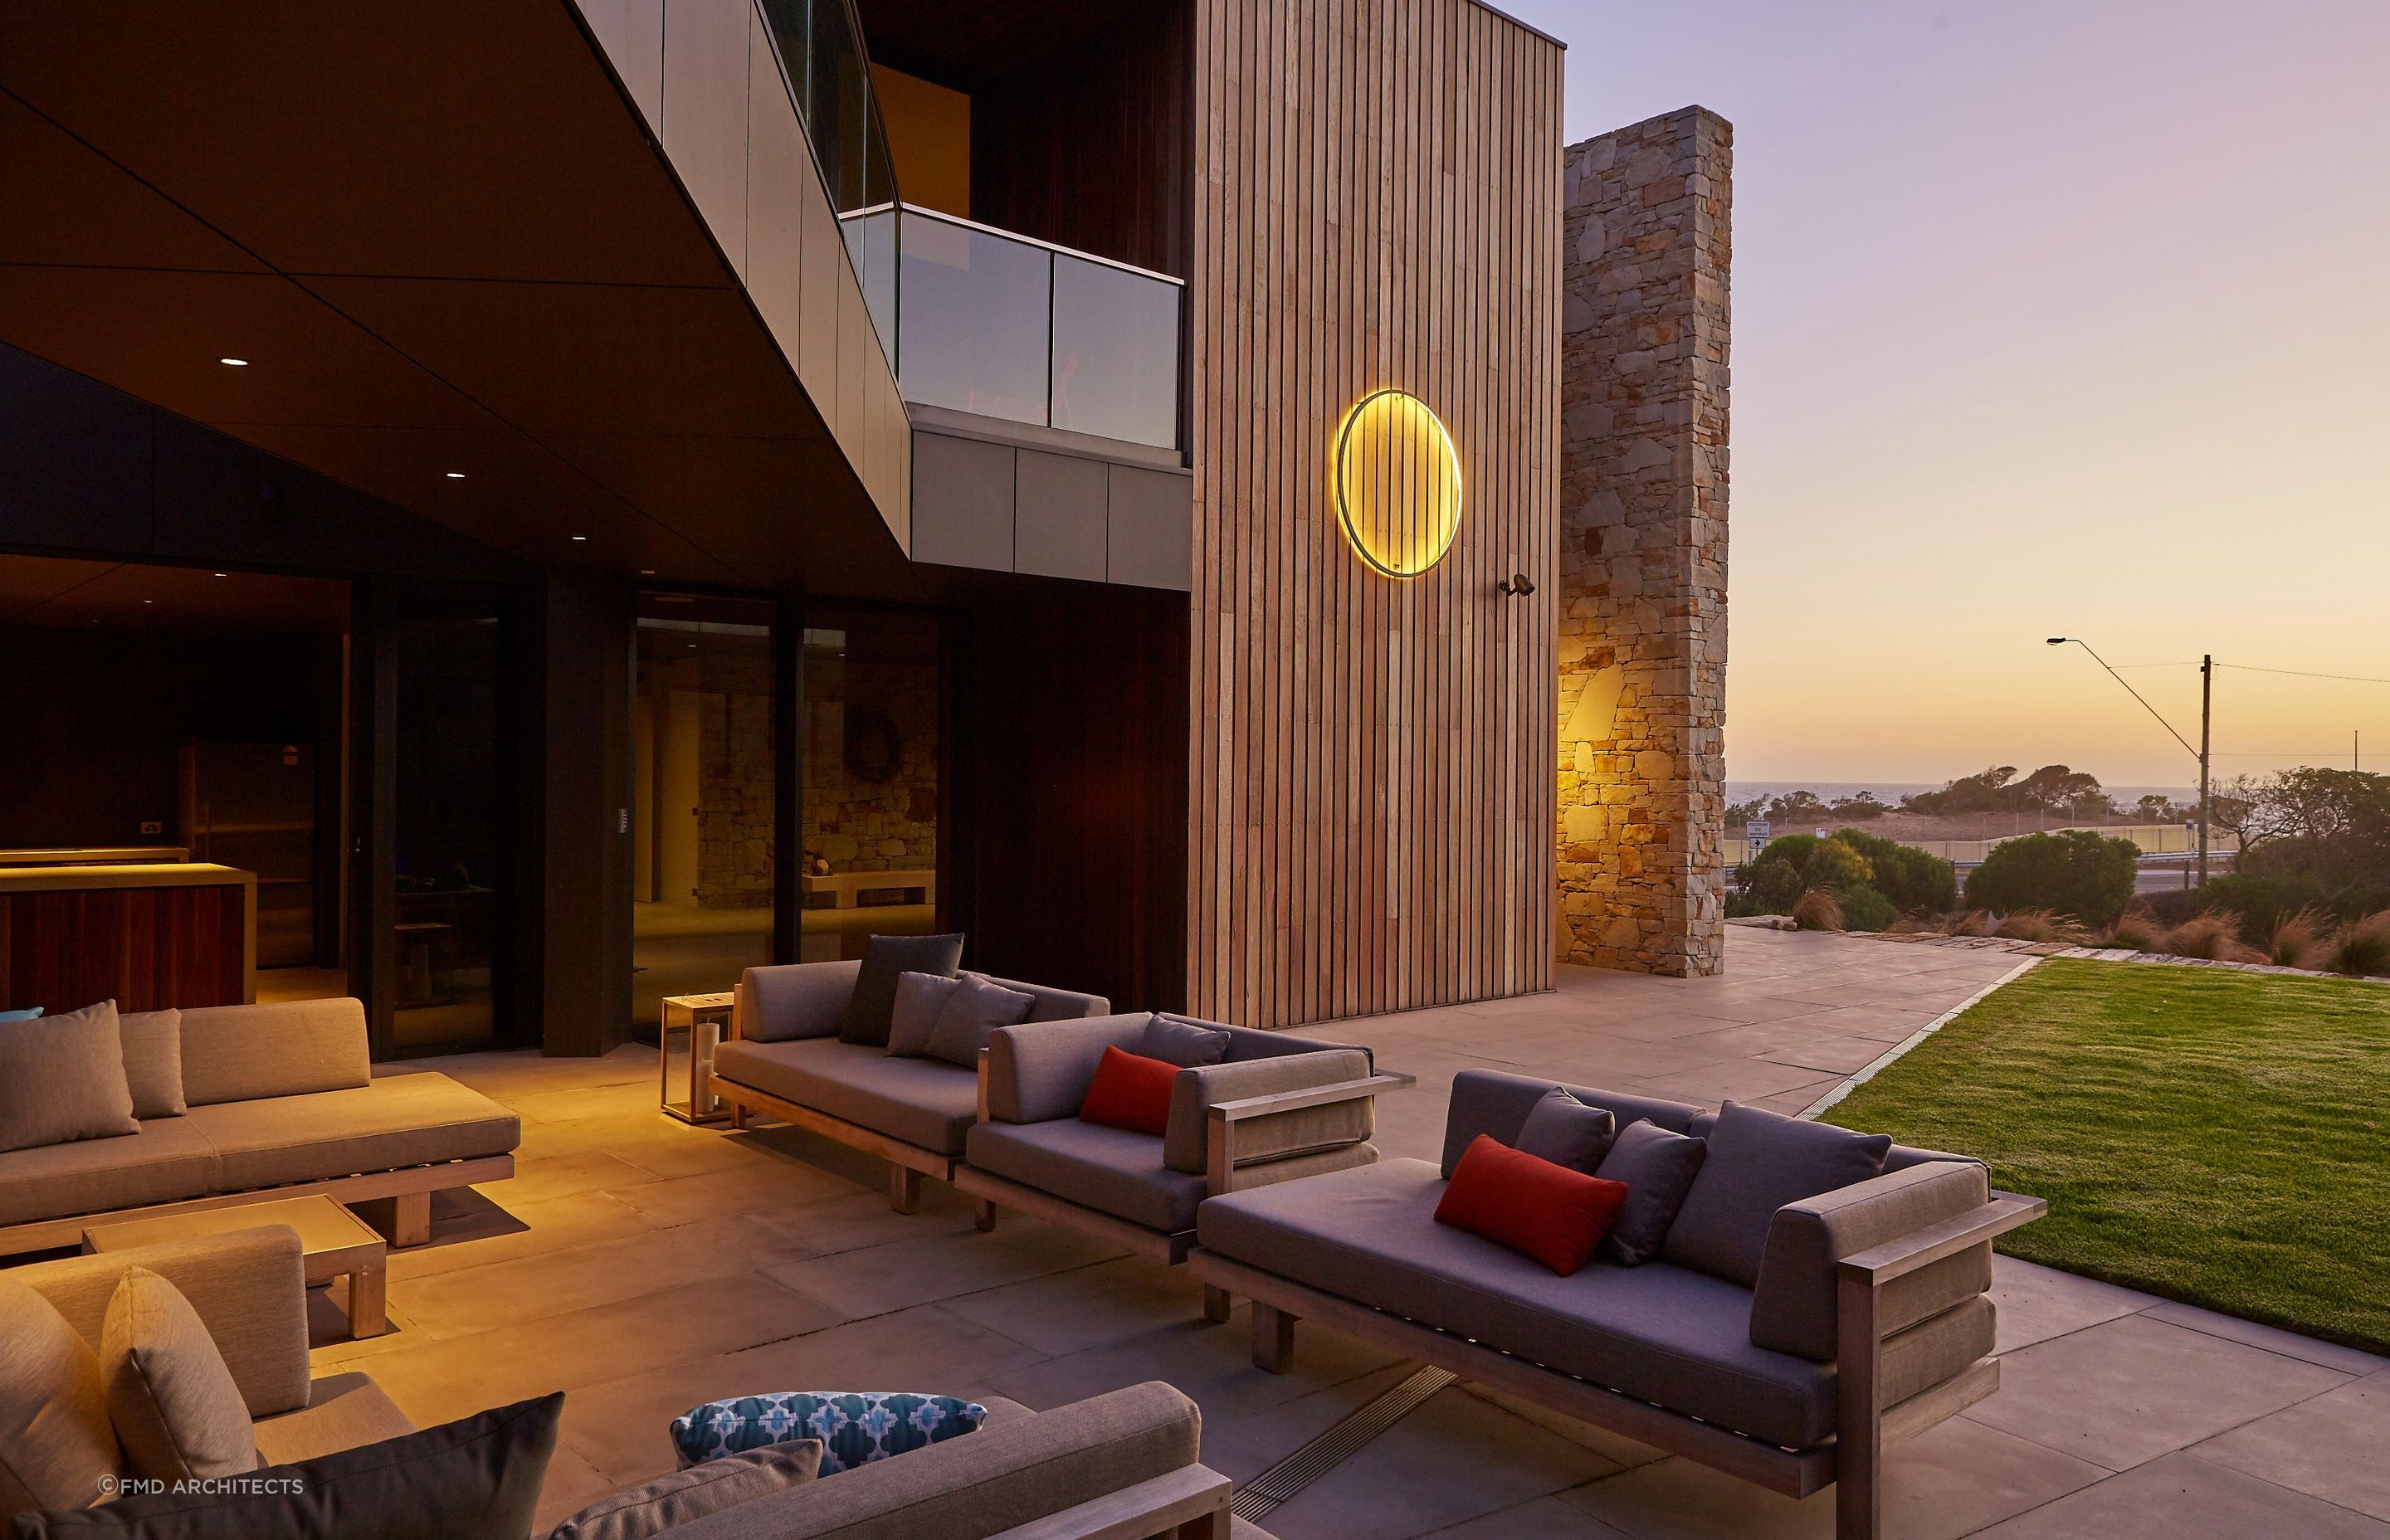 Ocean Residence by FMD Architects | Photography: Derek Swalwell, Fraser Marsden - the perfect outdoor room for a spot of evening relaxation